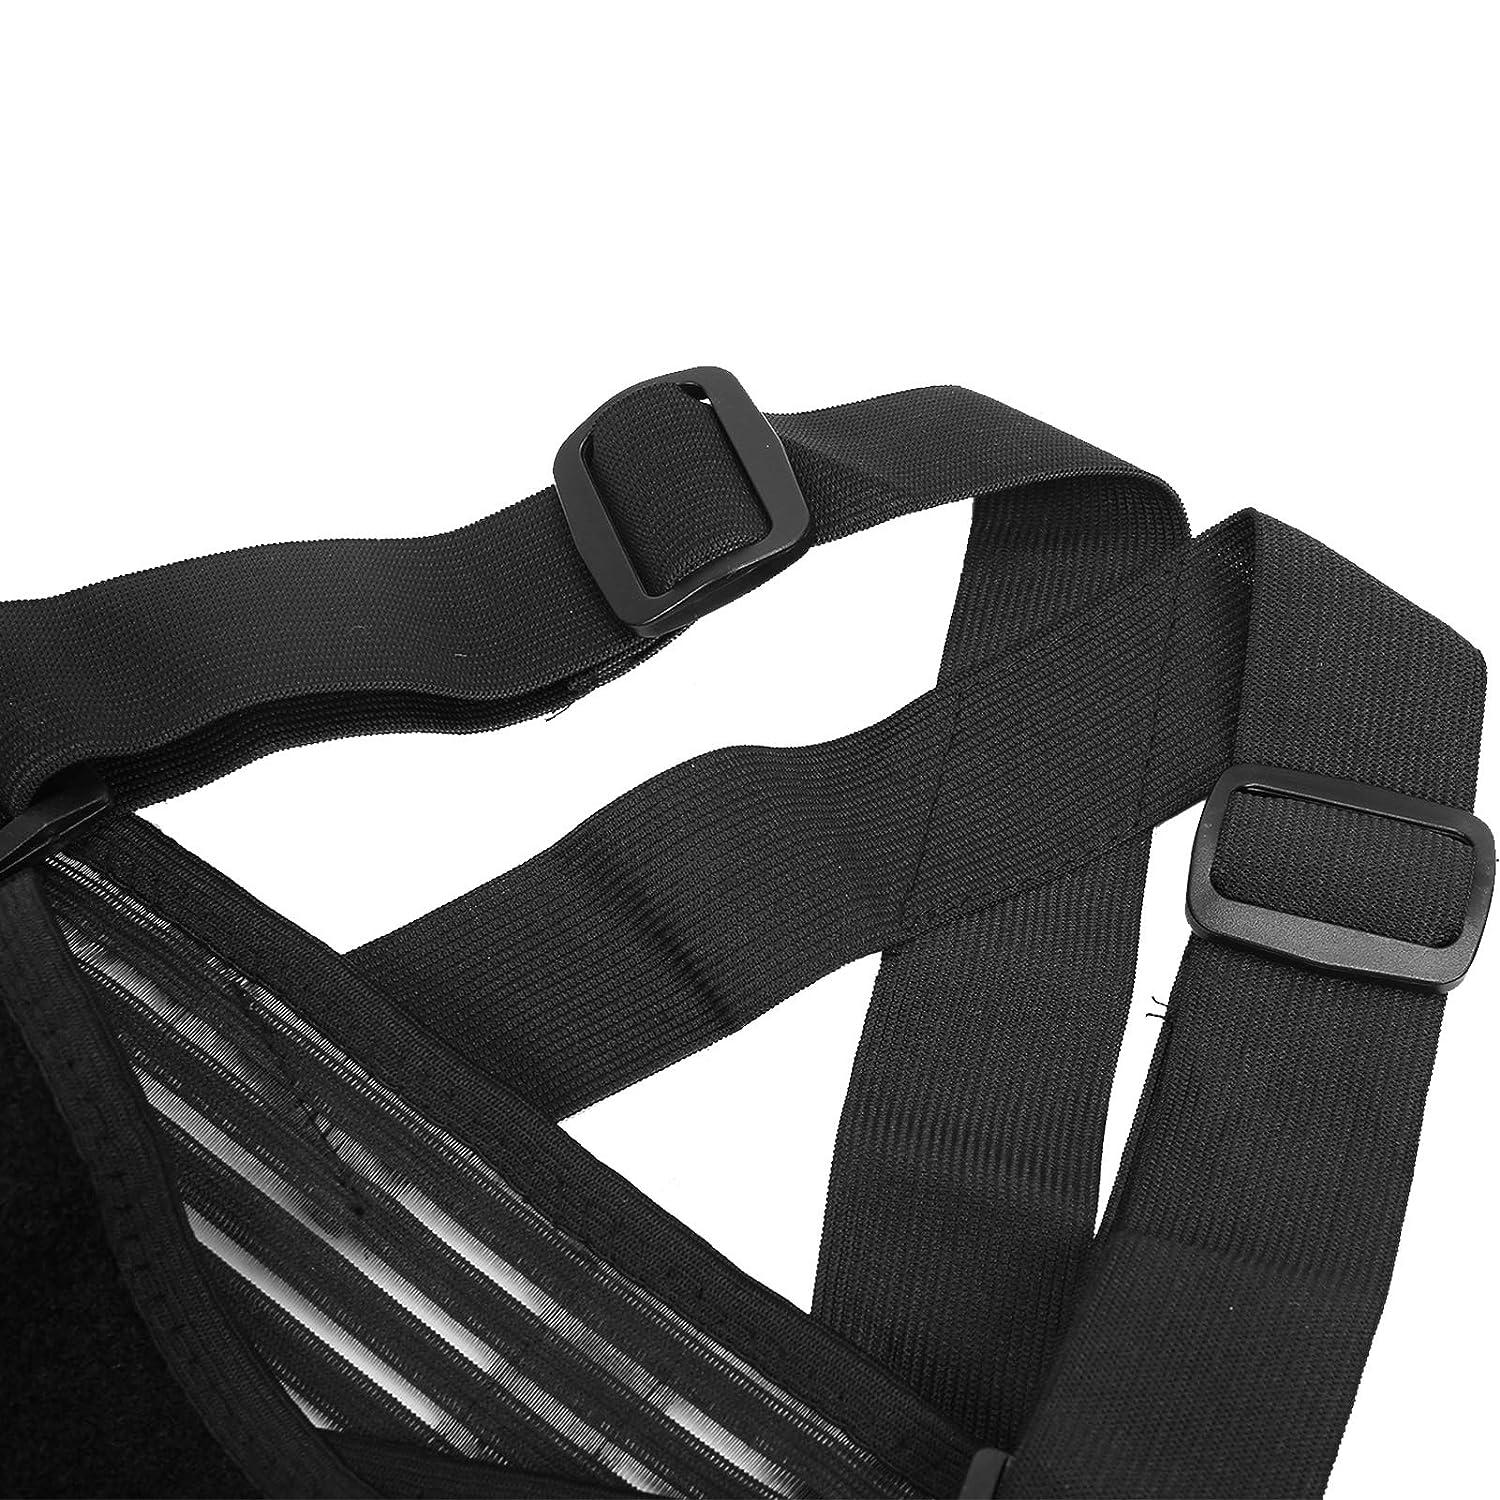 Domqga Rib Belt,Chest Support Brace Breathable Elastic Dual Support Broken  Rib Brace with Adjustable Shoulder Straps for Rib Fractures,Elastic Chest